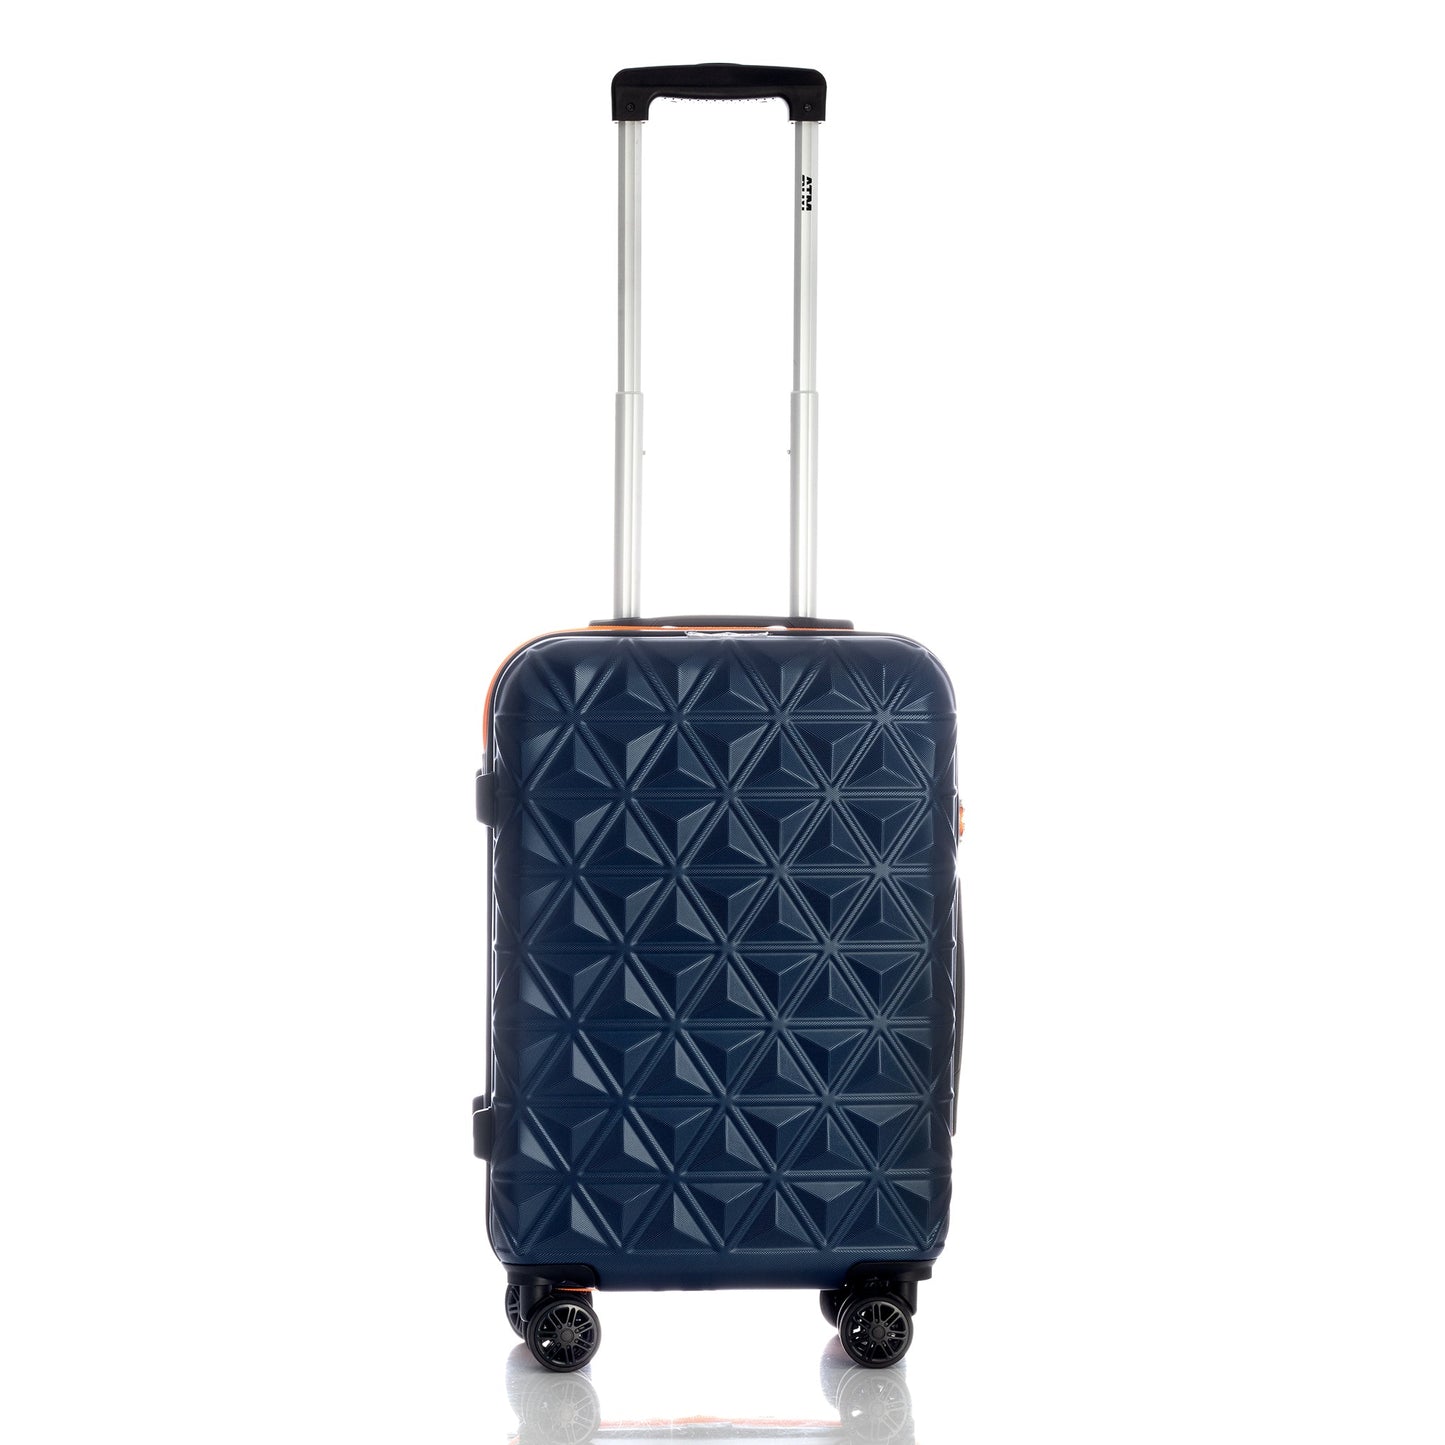 Cosmos Collection Navy Blue Luggage 3 Piece Set (21/25/29") Suitcase Lock Spinner Hardshell